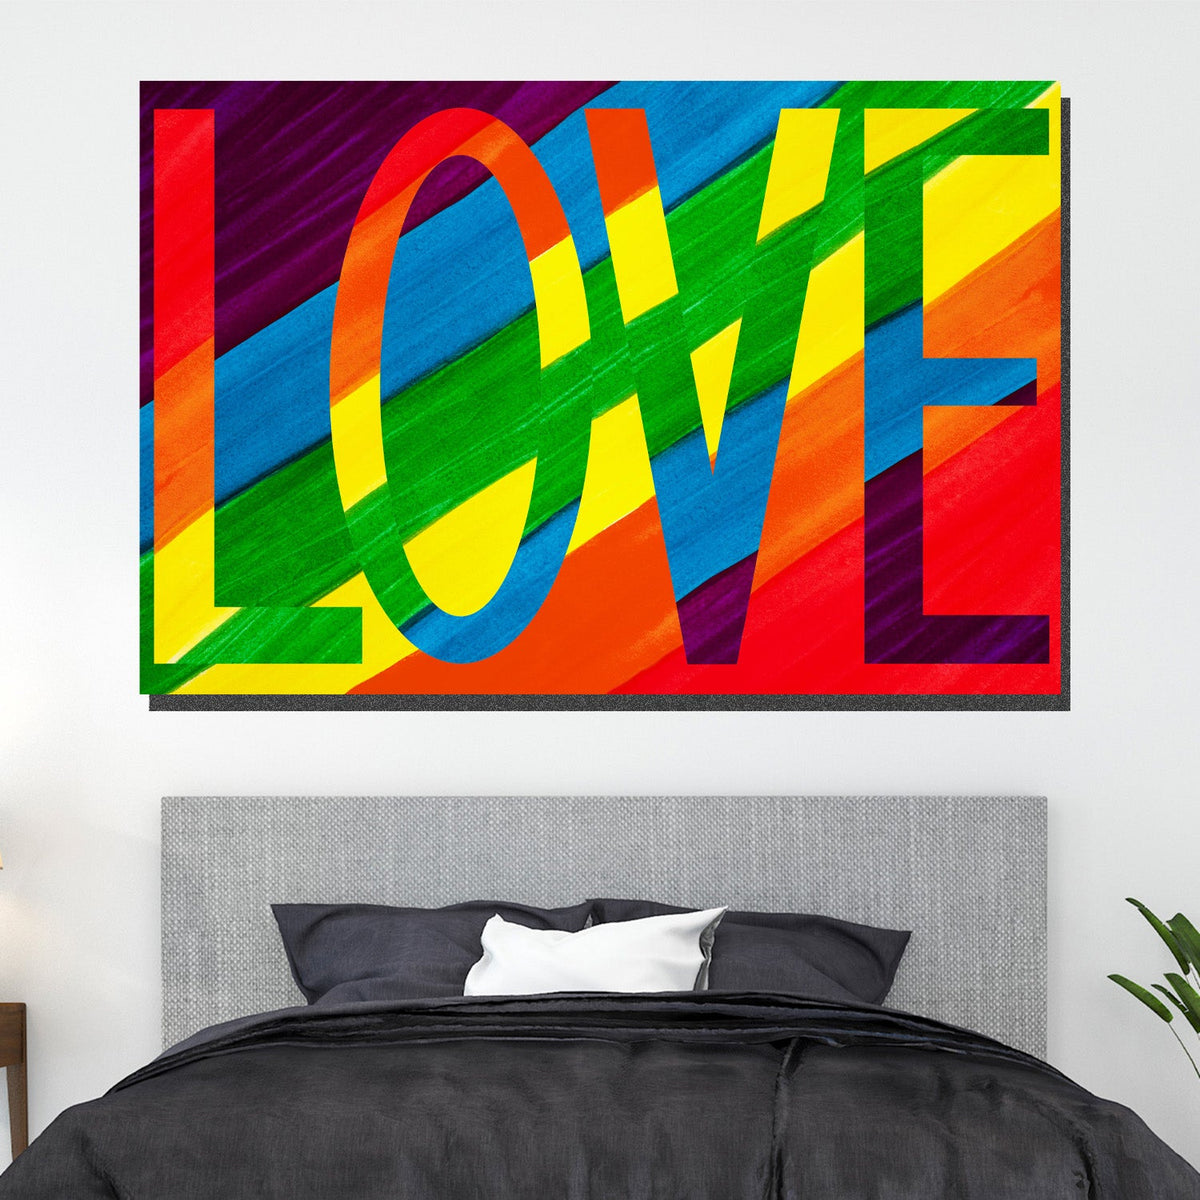 https://cdn.shopify.com/s/files/1/0387/9986/8044/products/ColoursofLoveCanvasArtprintStretched-1.jpg